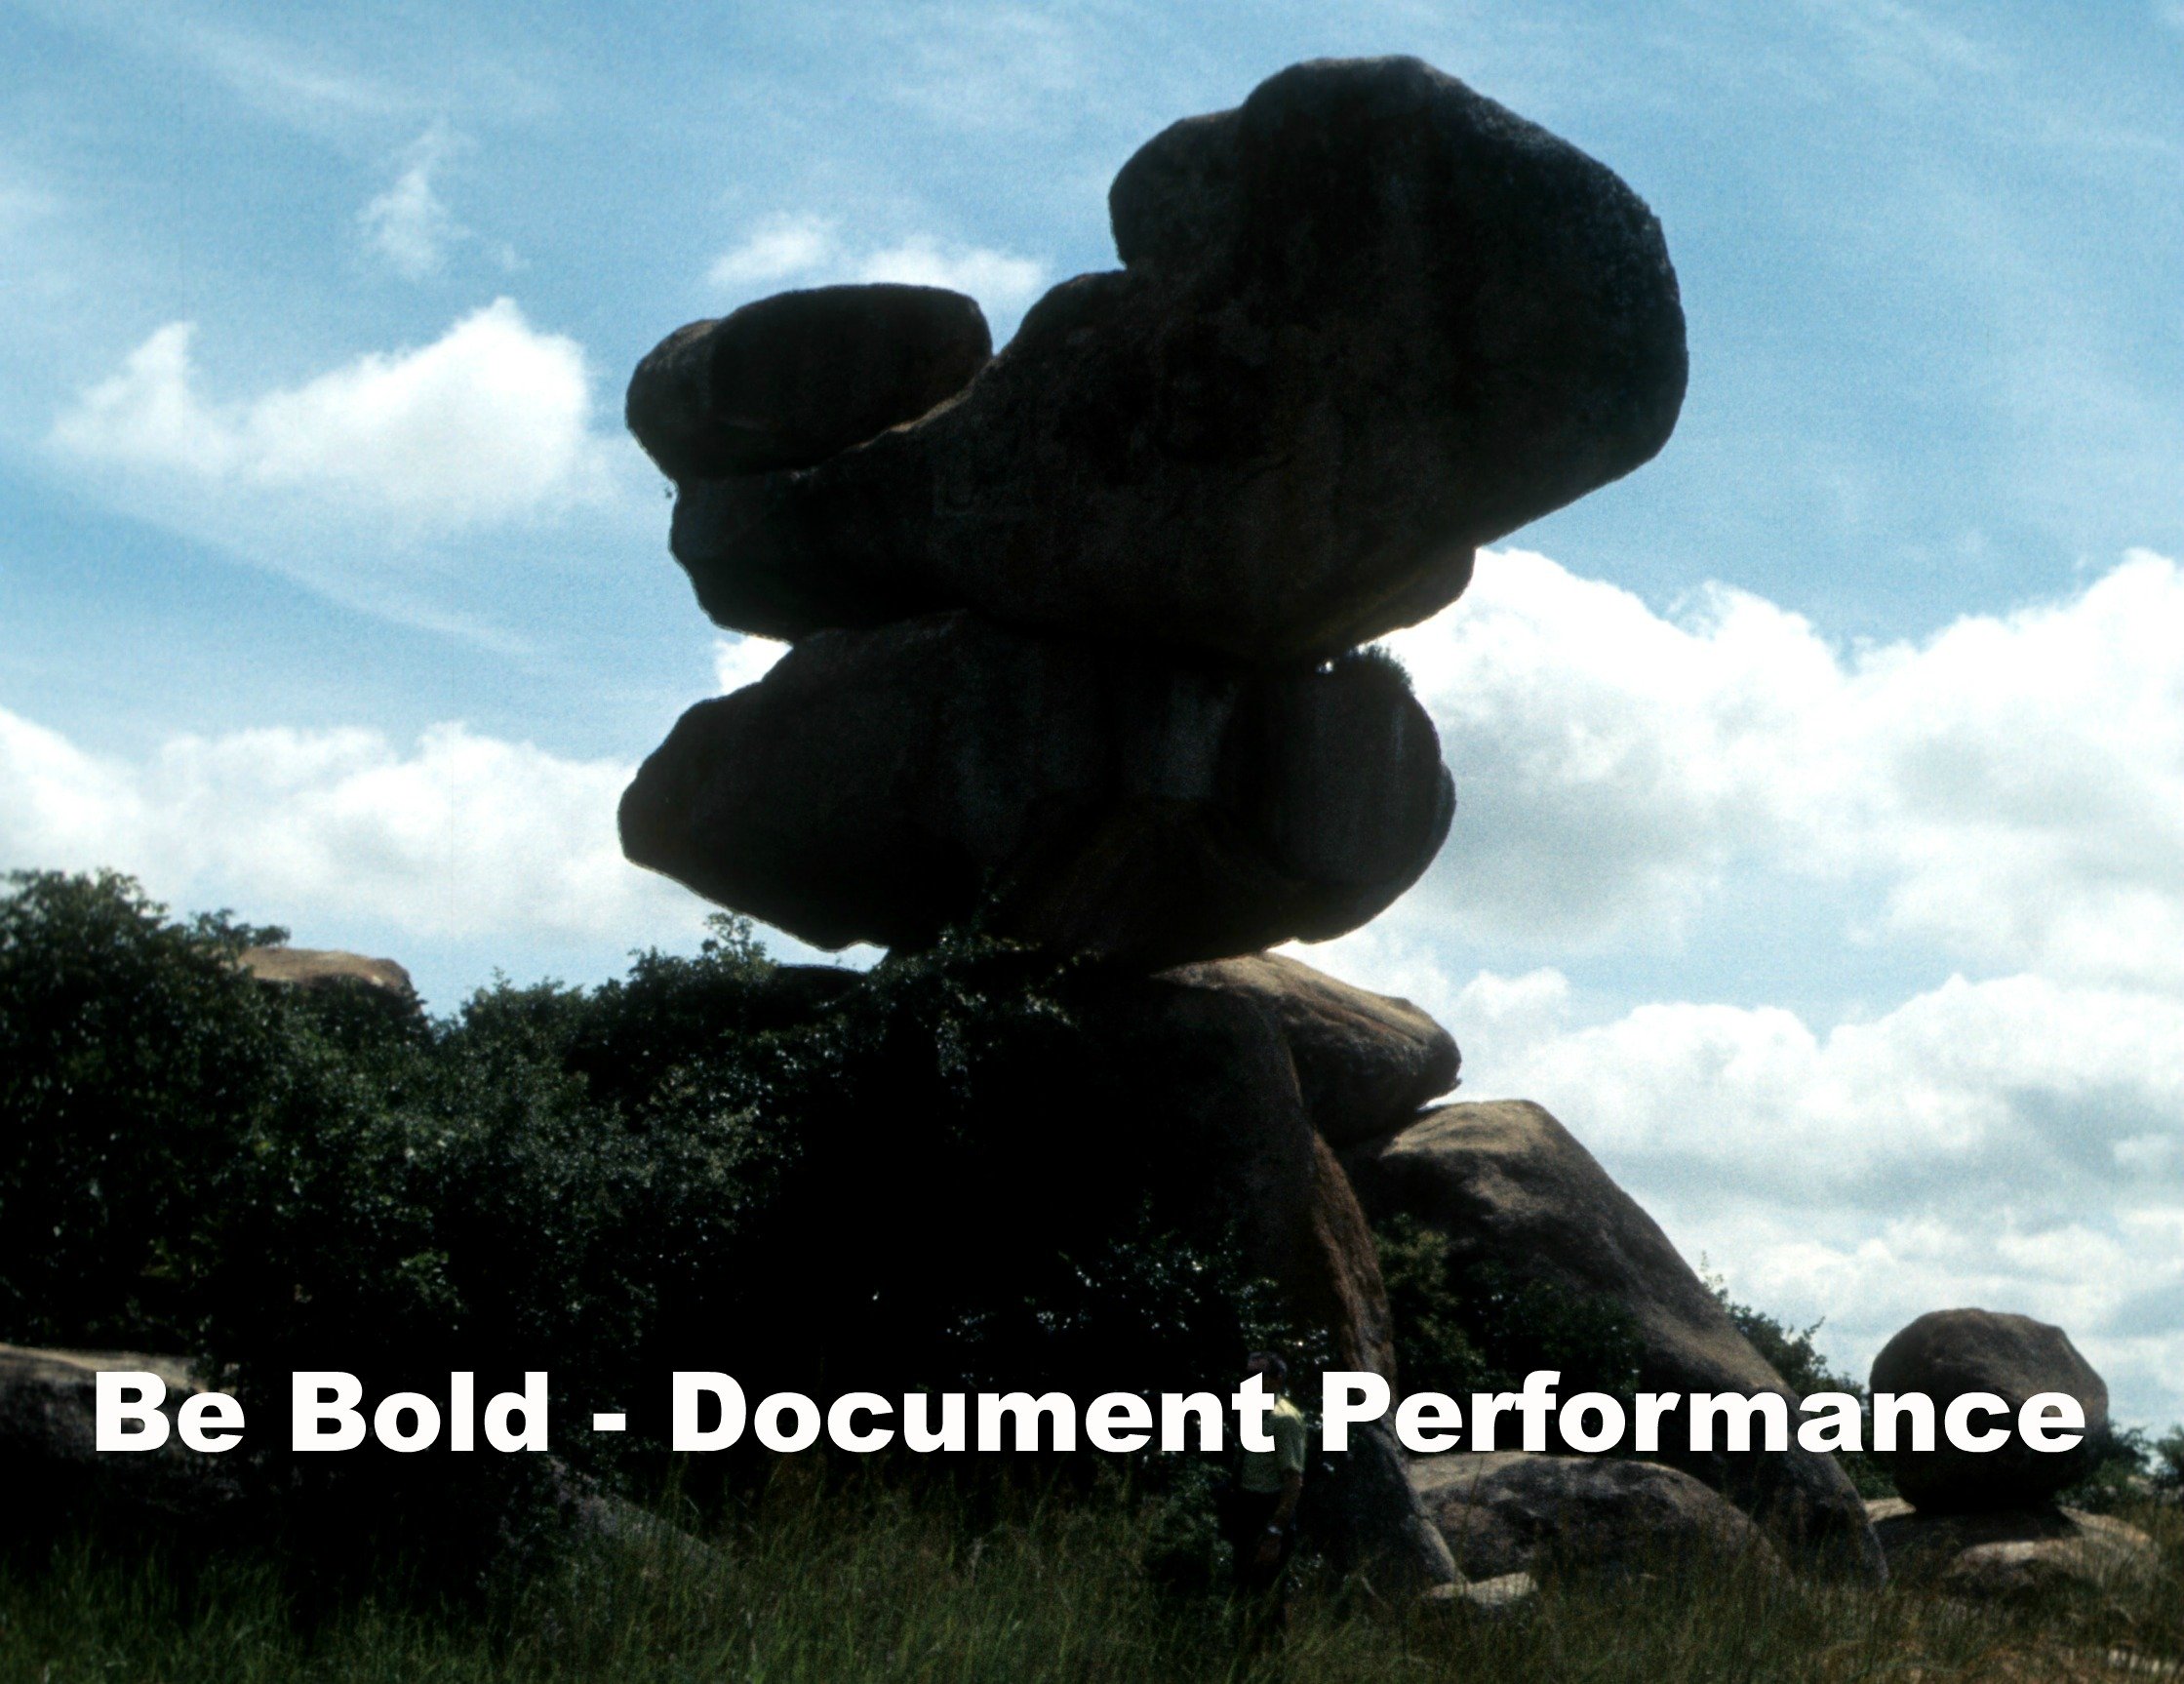 Teetering Rock Formation with Caption, "Be Bold -- Document Performance